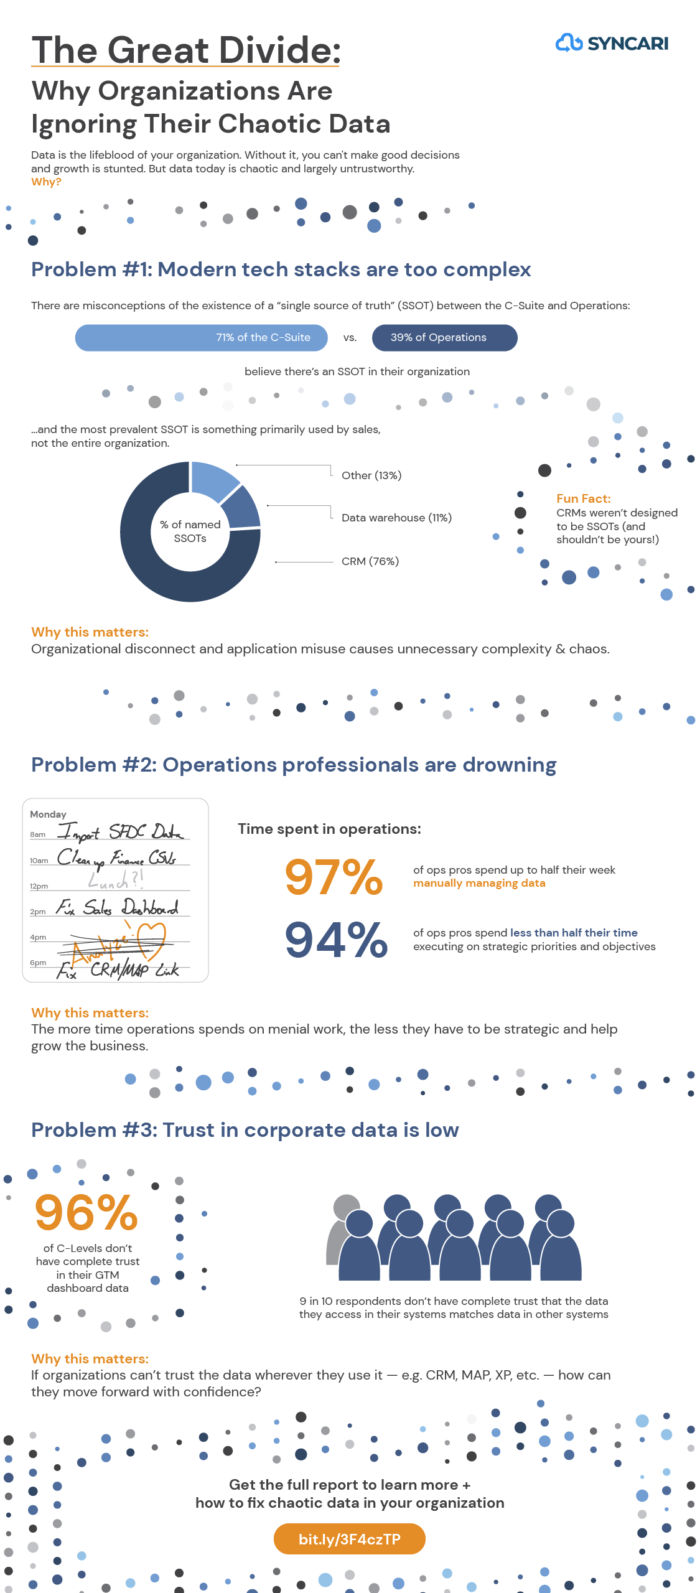 Why Organizations Ignore Chaotic Data - Syncari Infographic